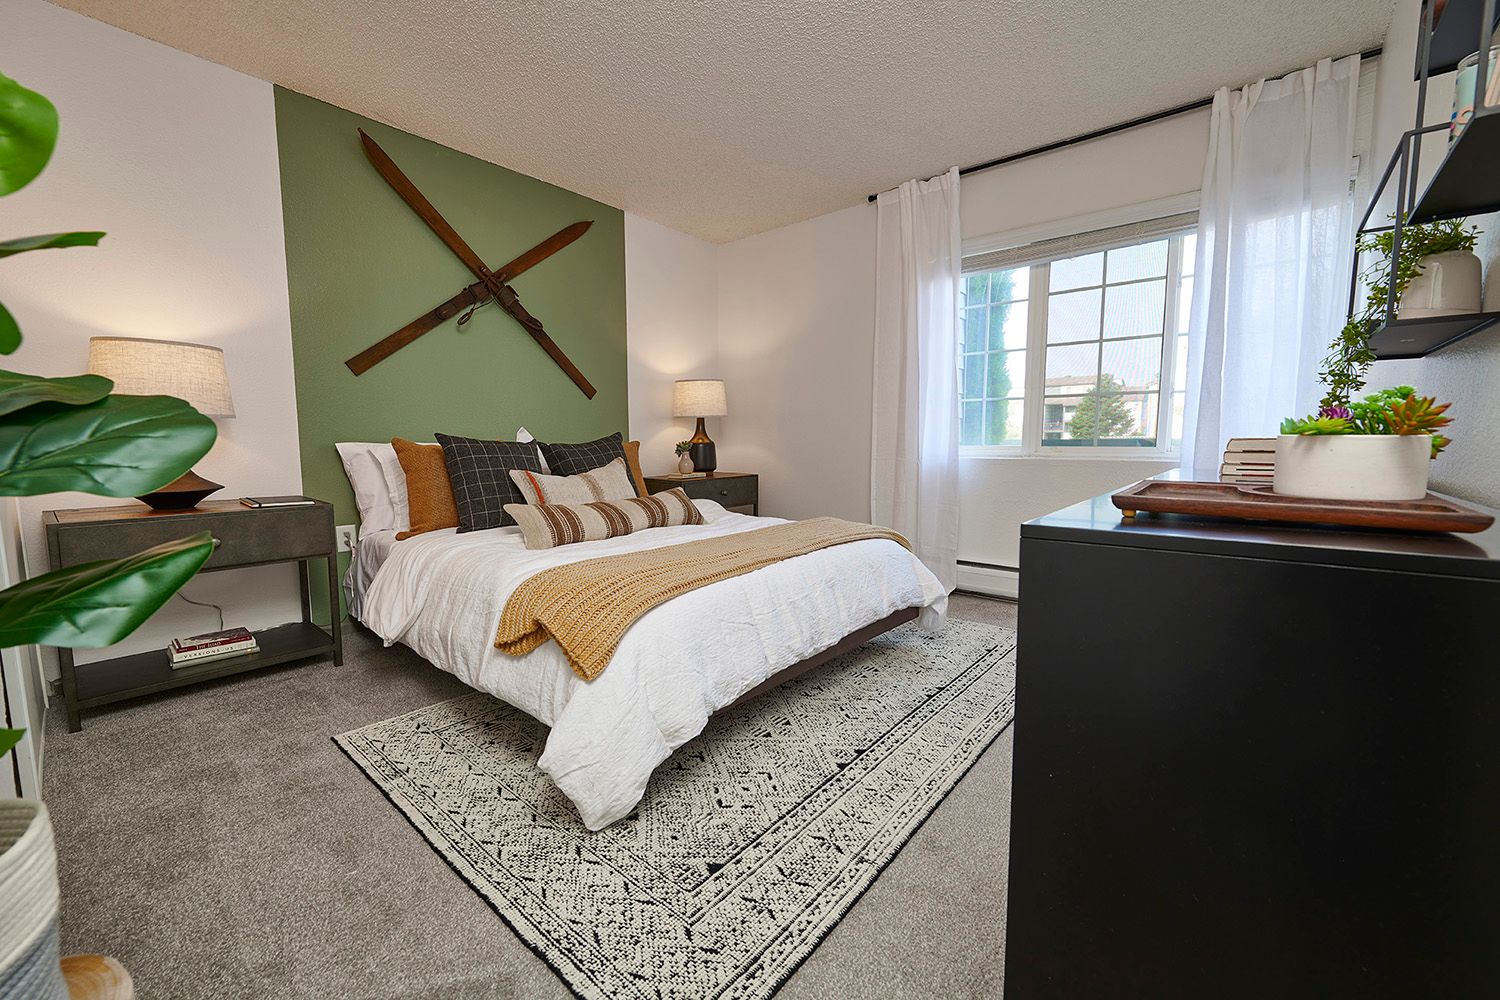 Carpeted bedroom with large windows and green accent wall